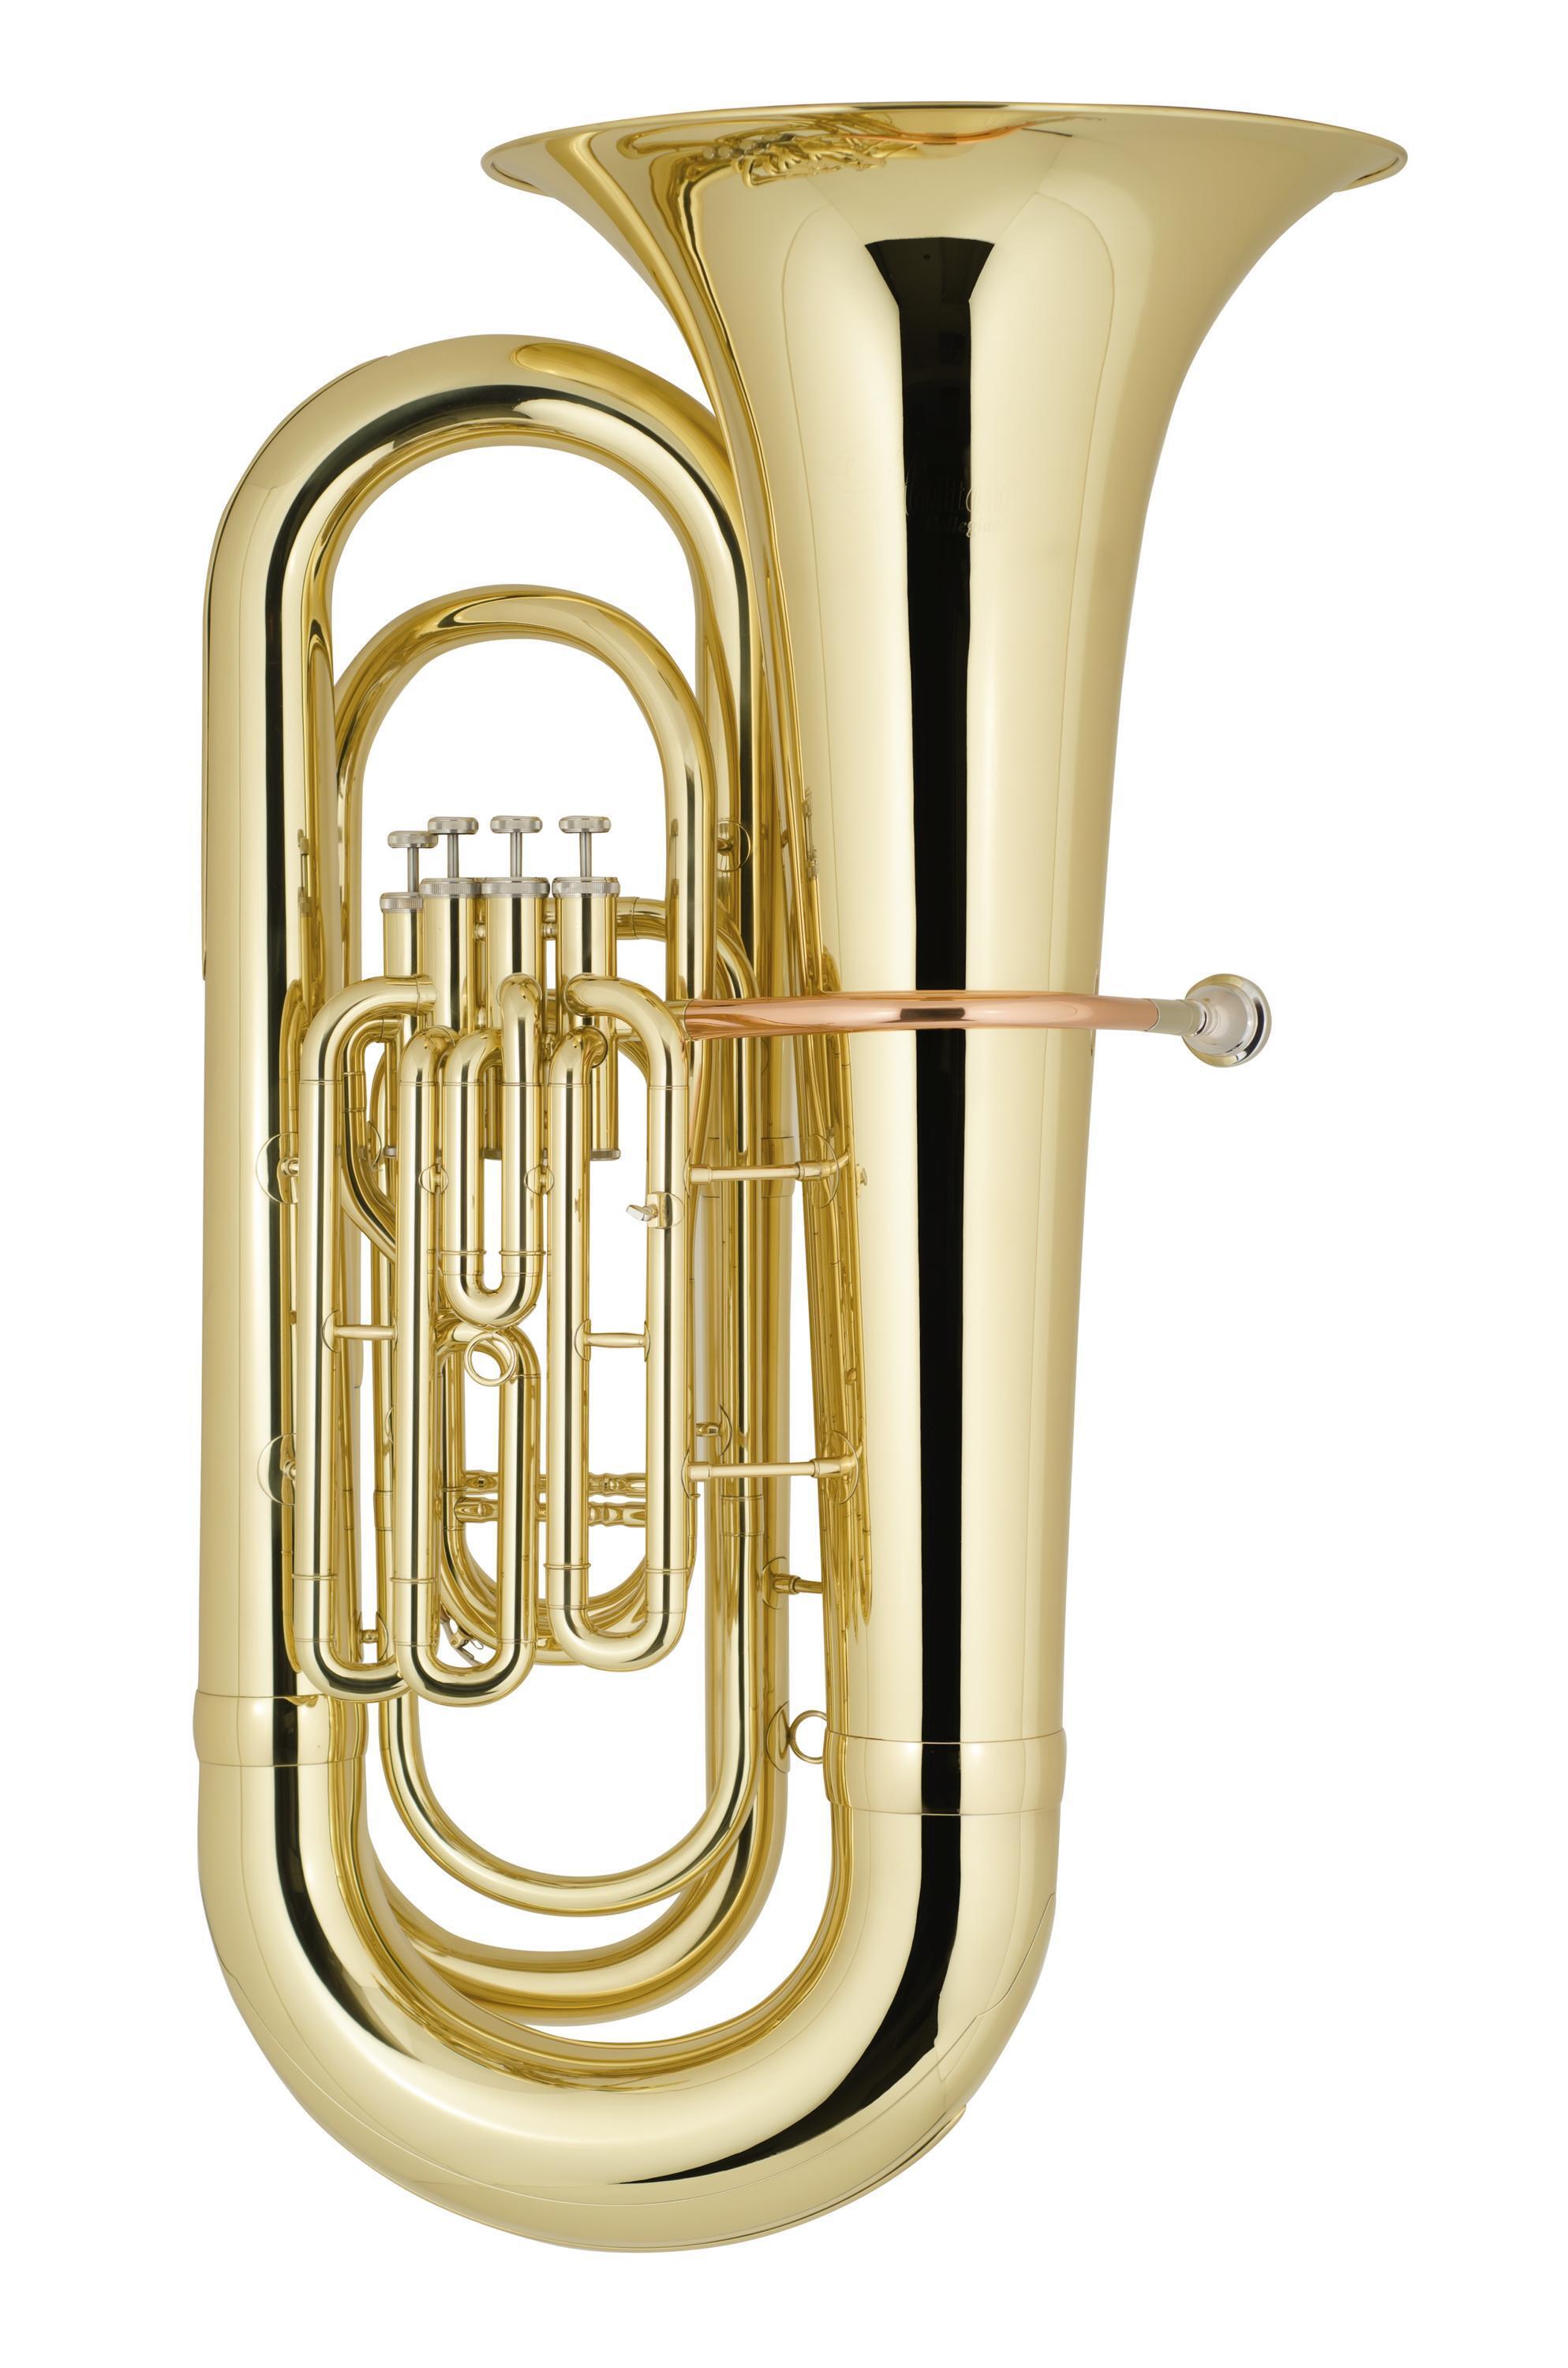 How to Compress Brass: Compression Settings for Trumpet, Tuba, & More!